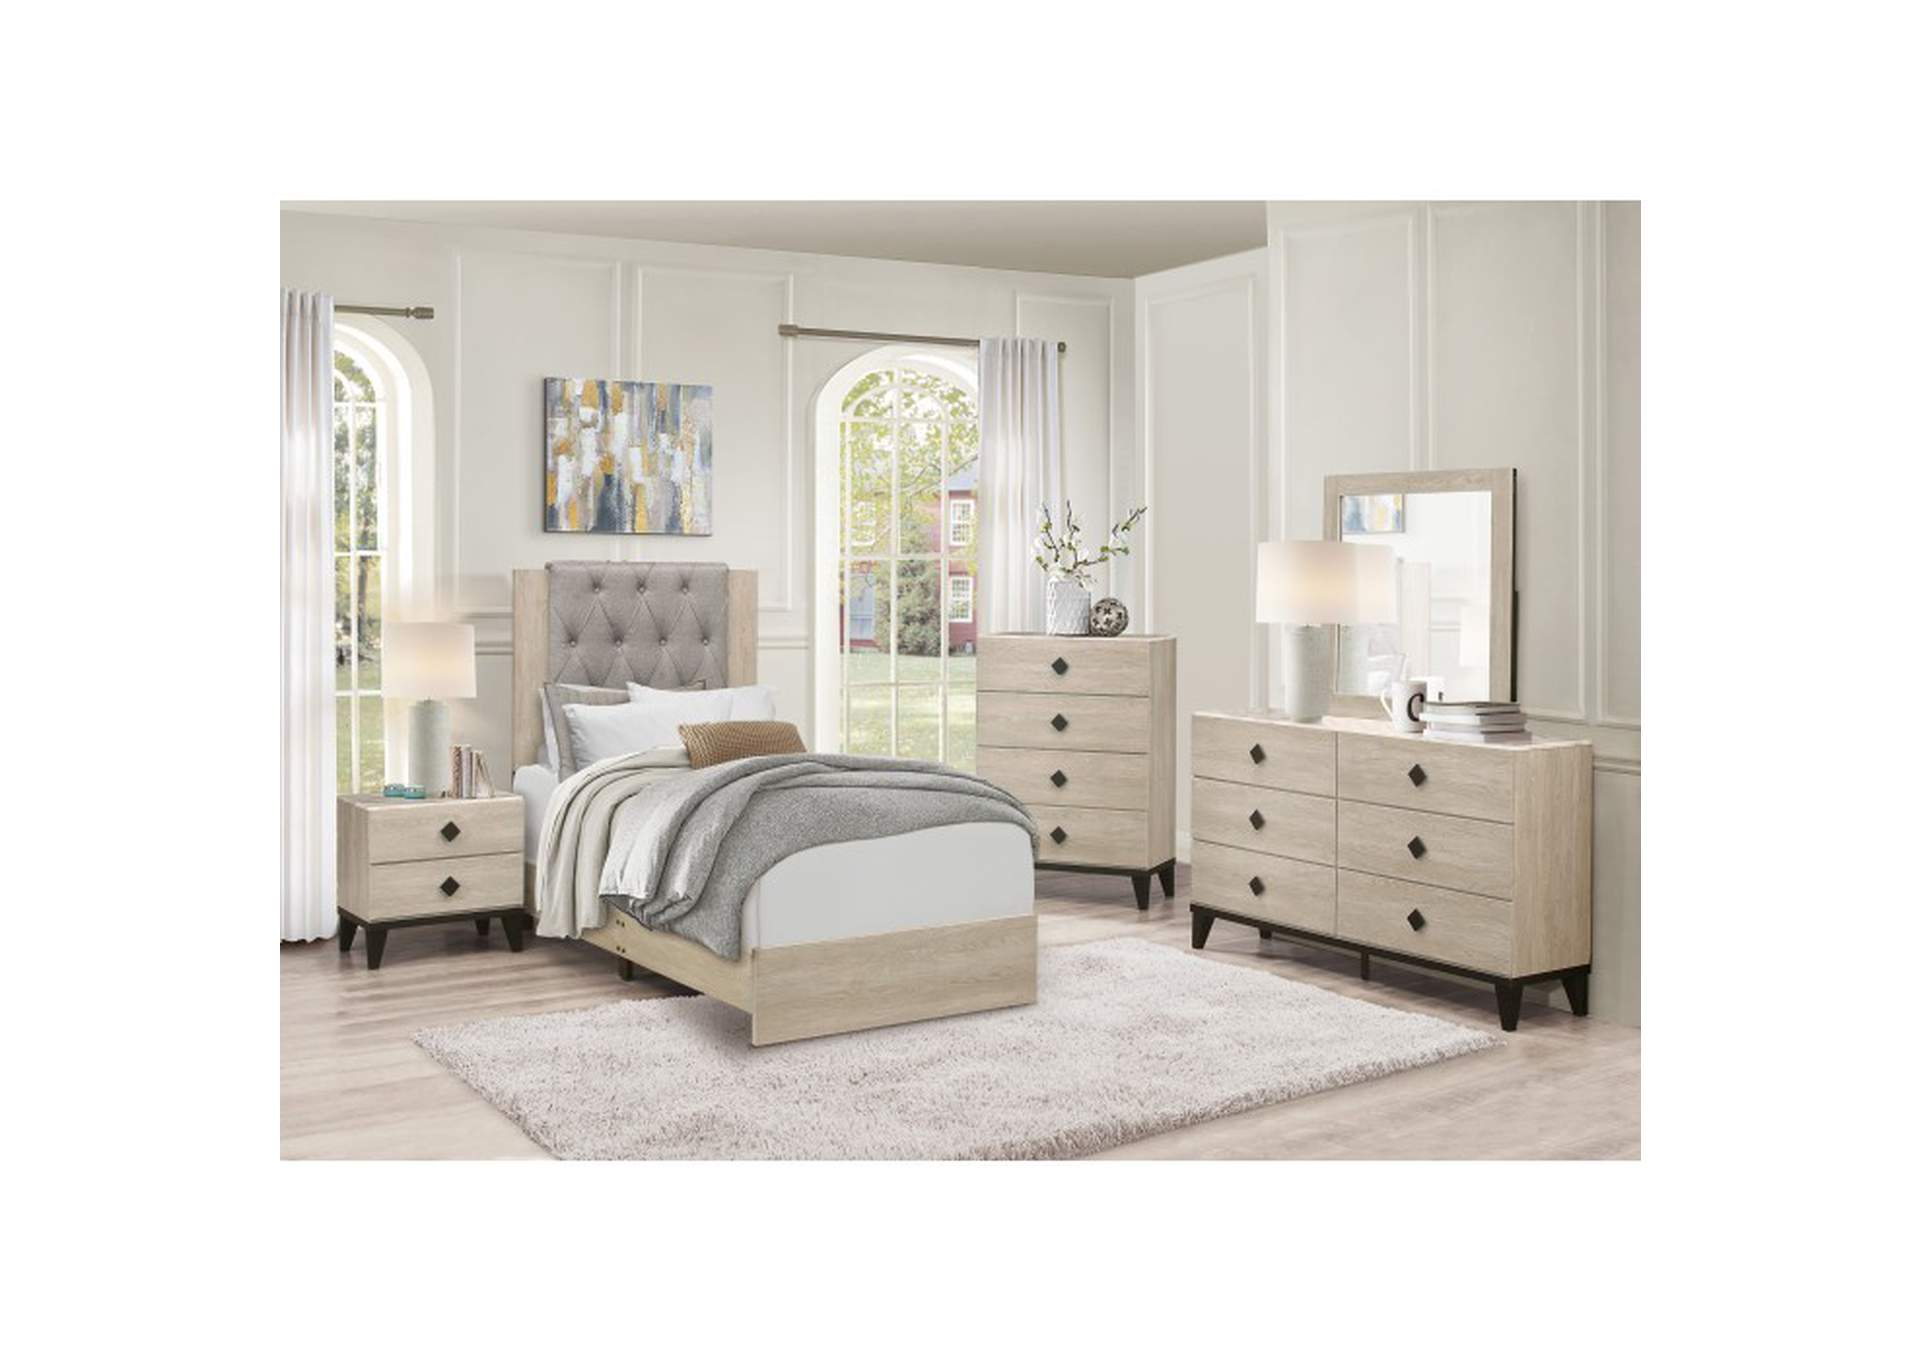 Whiting Twin Bed,Homelegance